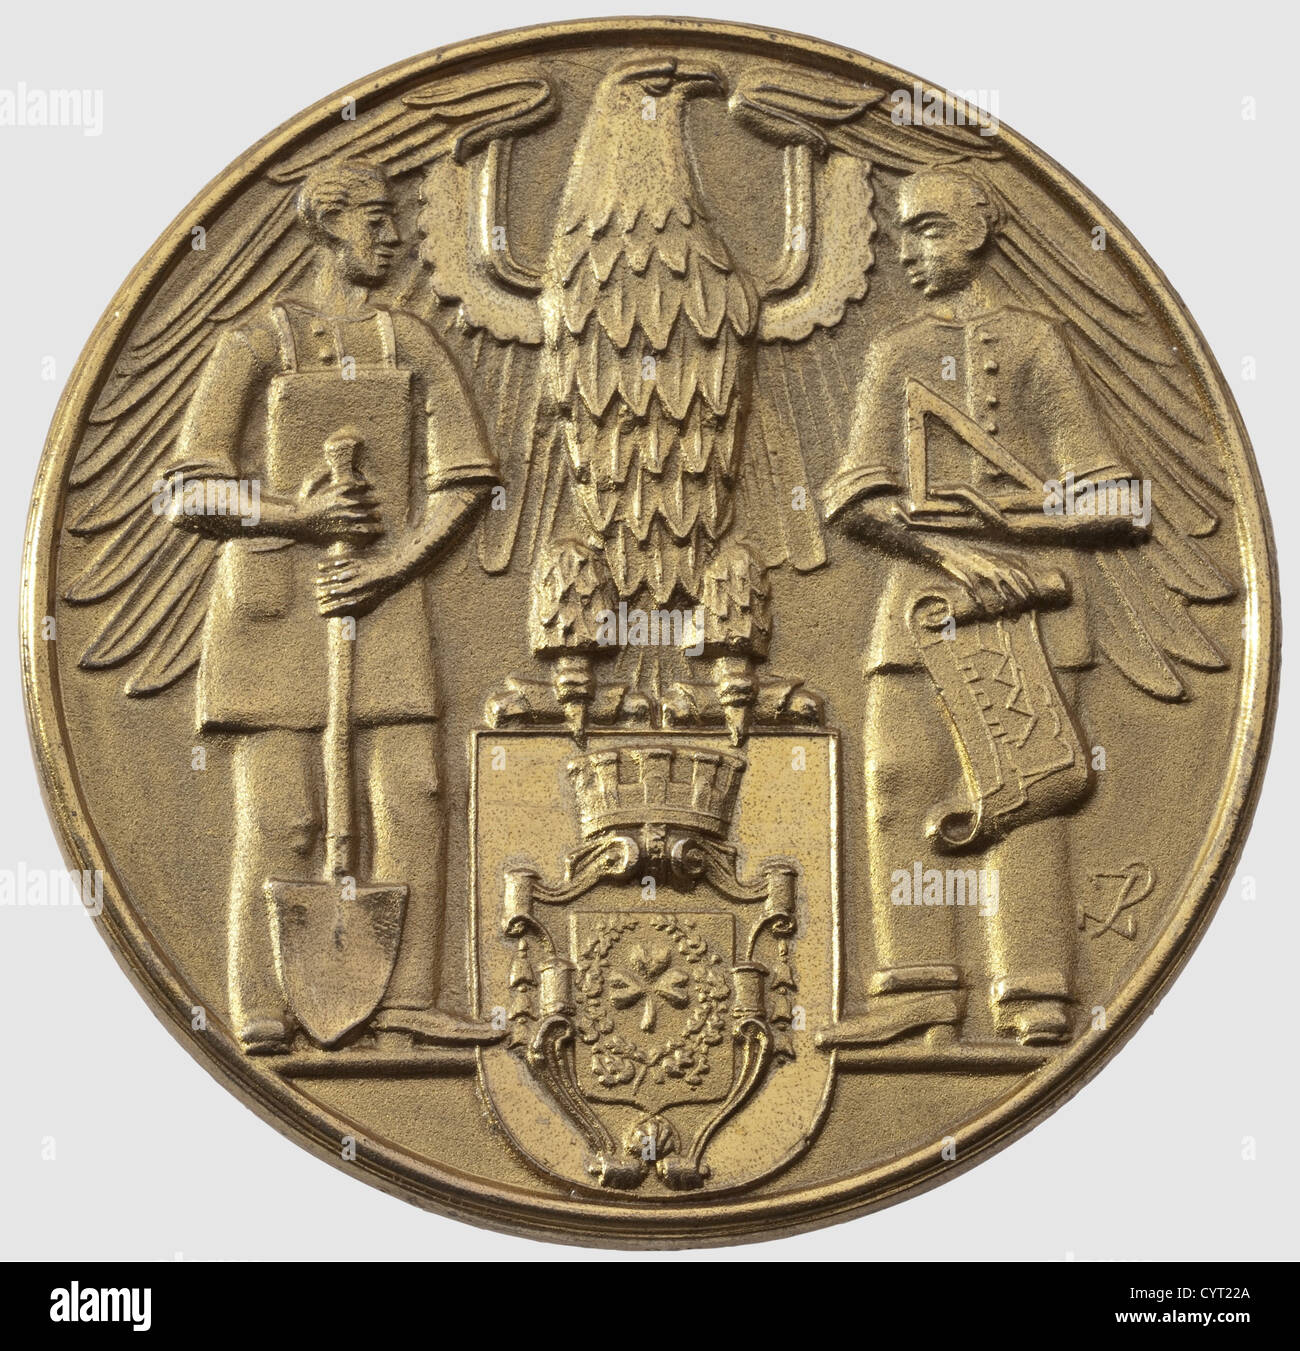 Julius Streicher(1885-1946),a large plaque granting the Gauleiter honorary citizenship of the city of Fürth The medal of gilt silver,the obverse showing an eagle carrying the coat of arms of Fürth,flanked by a craftsman and a worker.The reverse with the inscription 'The city of Fürth in Bav.confers upon the Franconian leader Julius Streicher,brave comrade-in-arms of Adolf Hitler,honorary citizenship - October 33 - Jacob Lord Mayor'.The edge of the medal stamped with hallmark '920'.In original silver presentation case,the obverse engraved with a view ,Additional-Rights-Clearences-Not Available Stock Photo